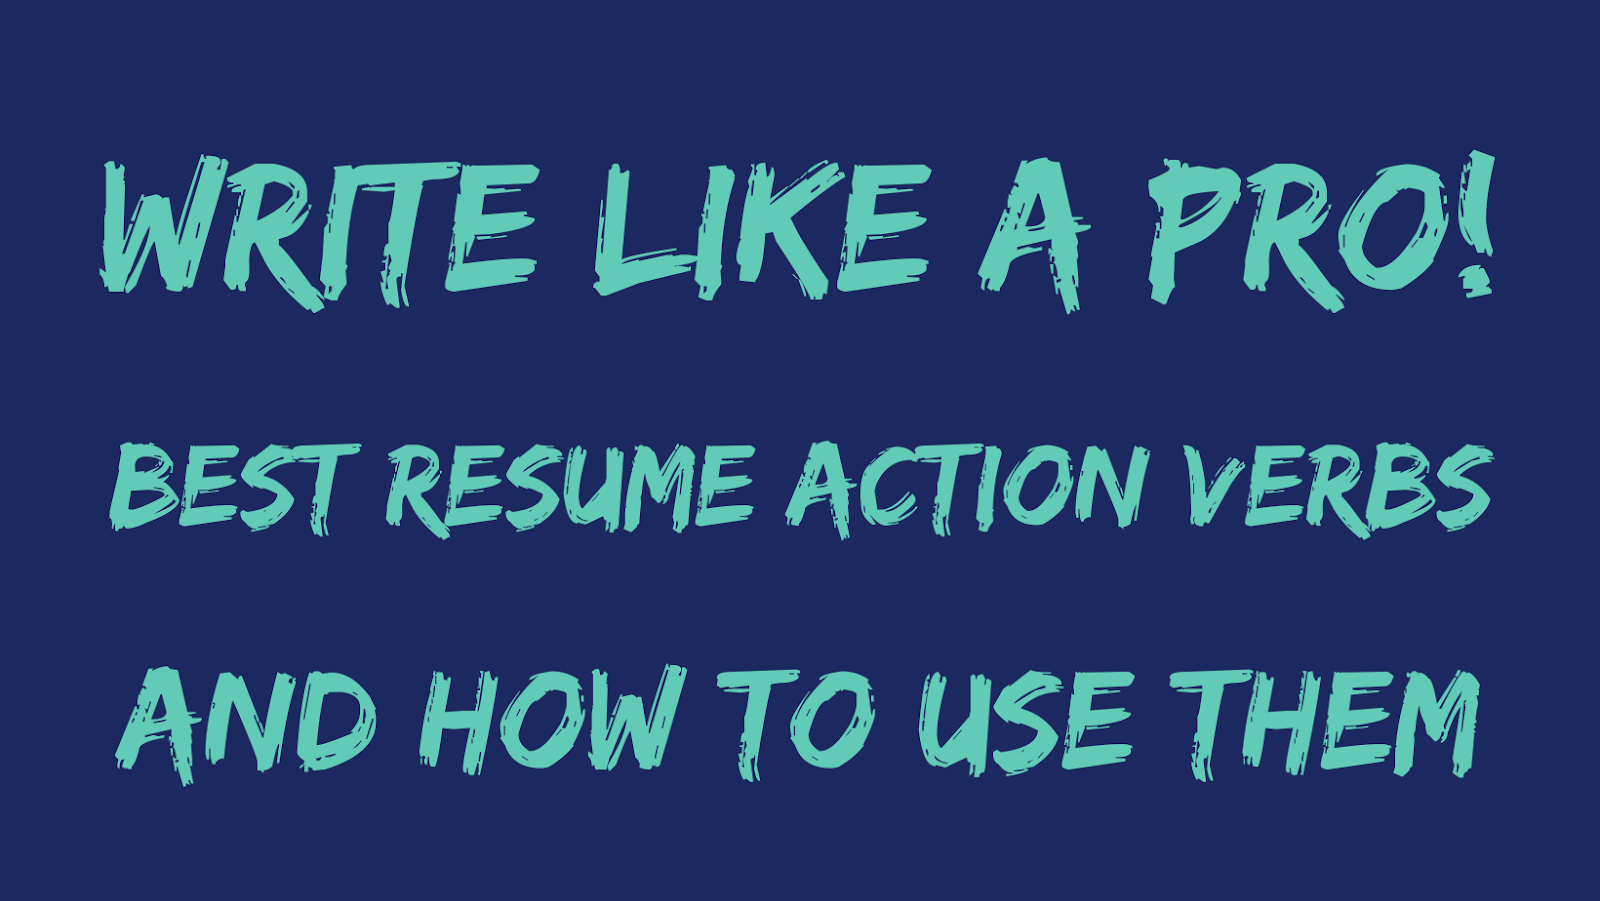 Best Resume Action Verbs & How To Use Them